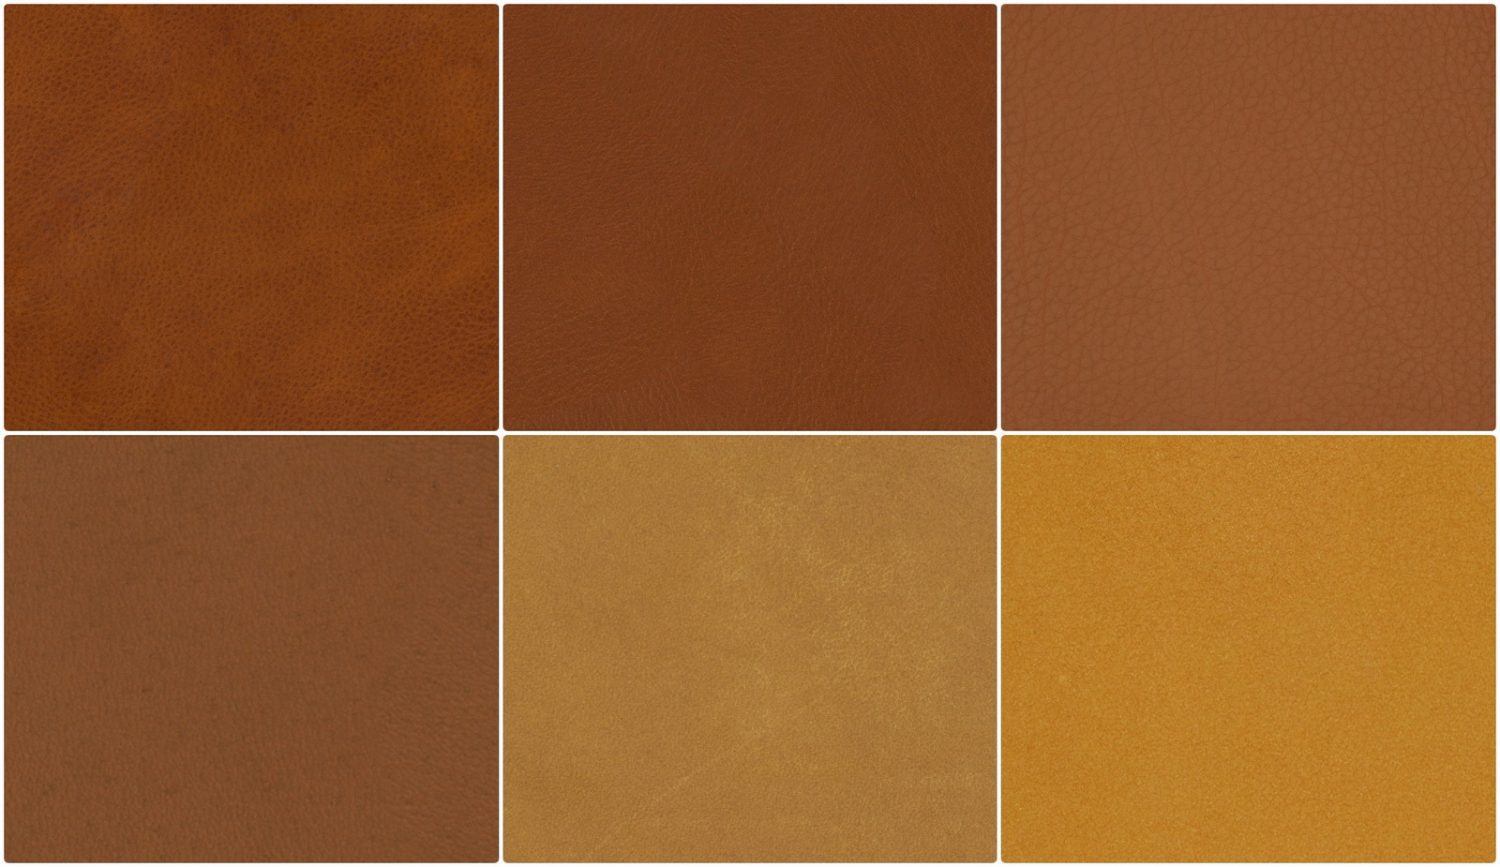 11289. Free Download High-Quality Leather Textures